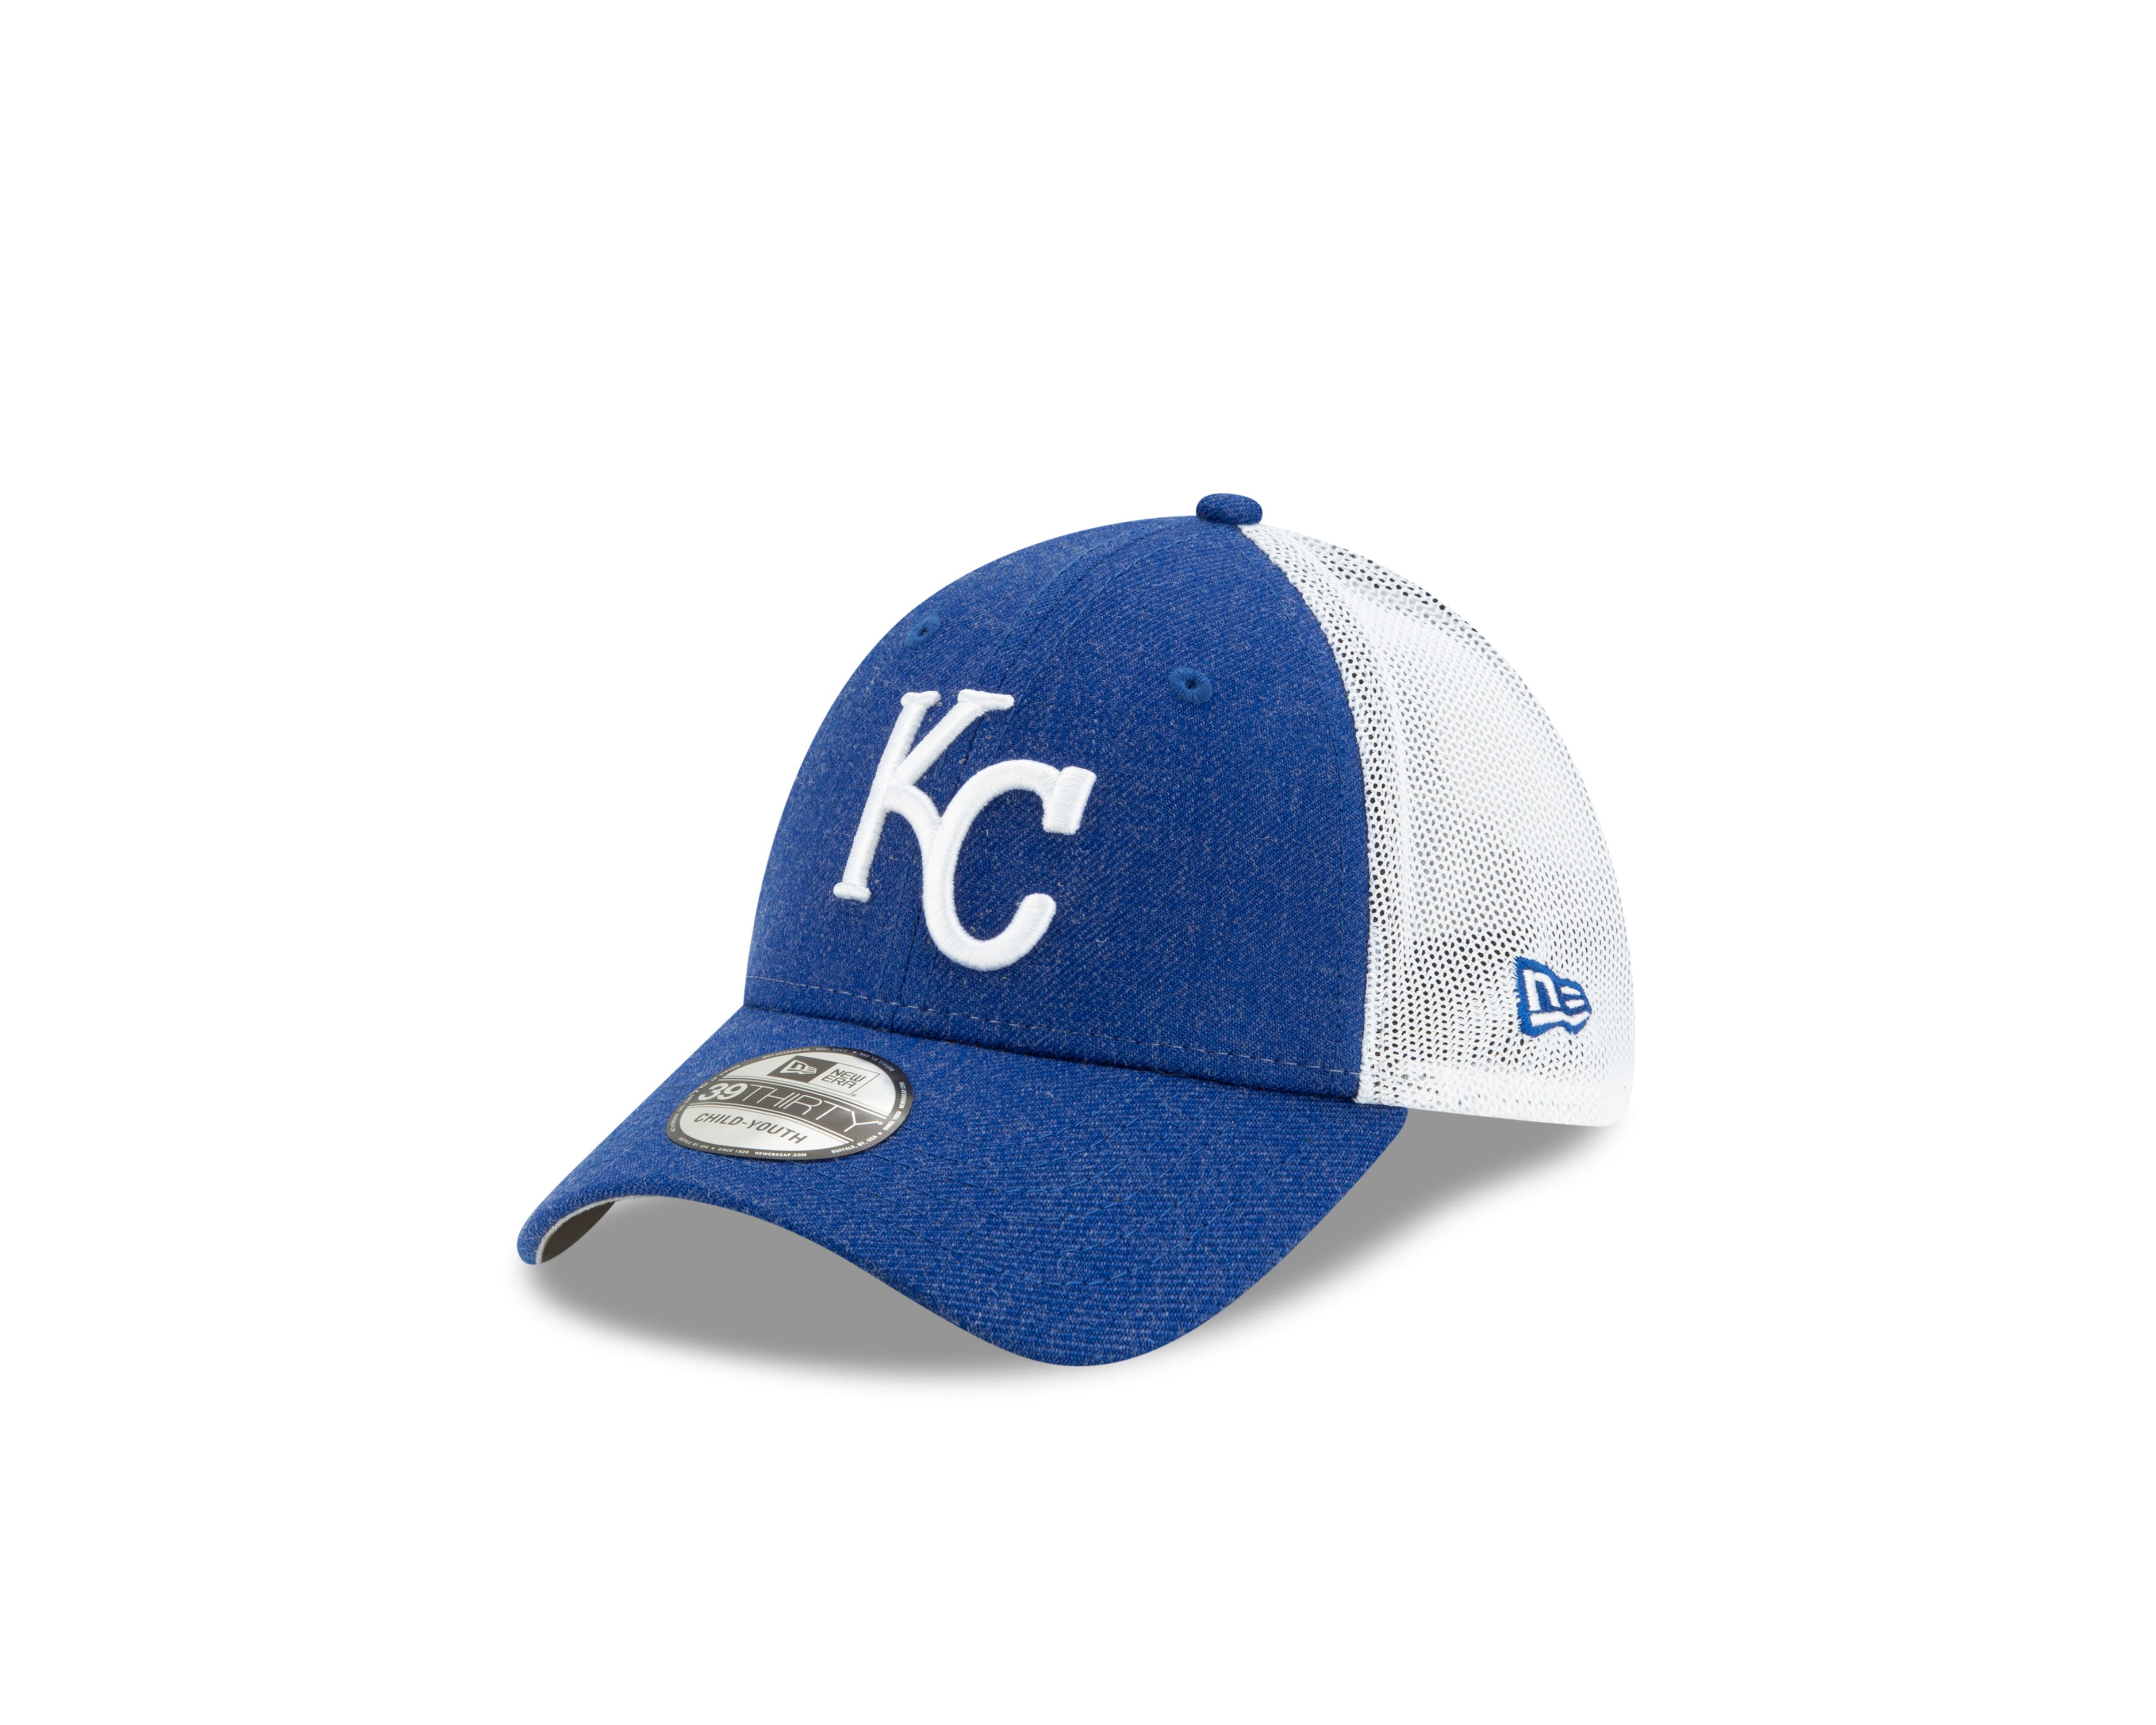 Kansas City Royals Youth 2020 39THIRTY Blue and White Hat by New